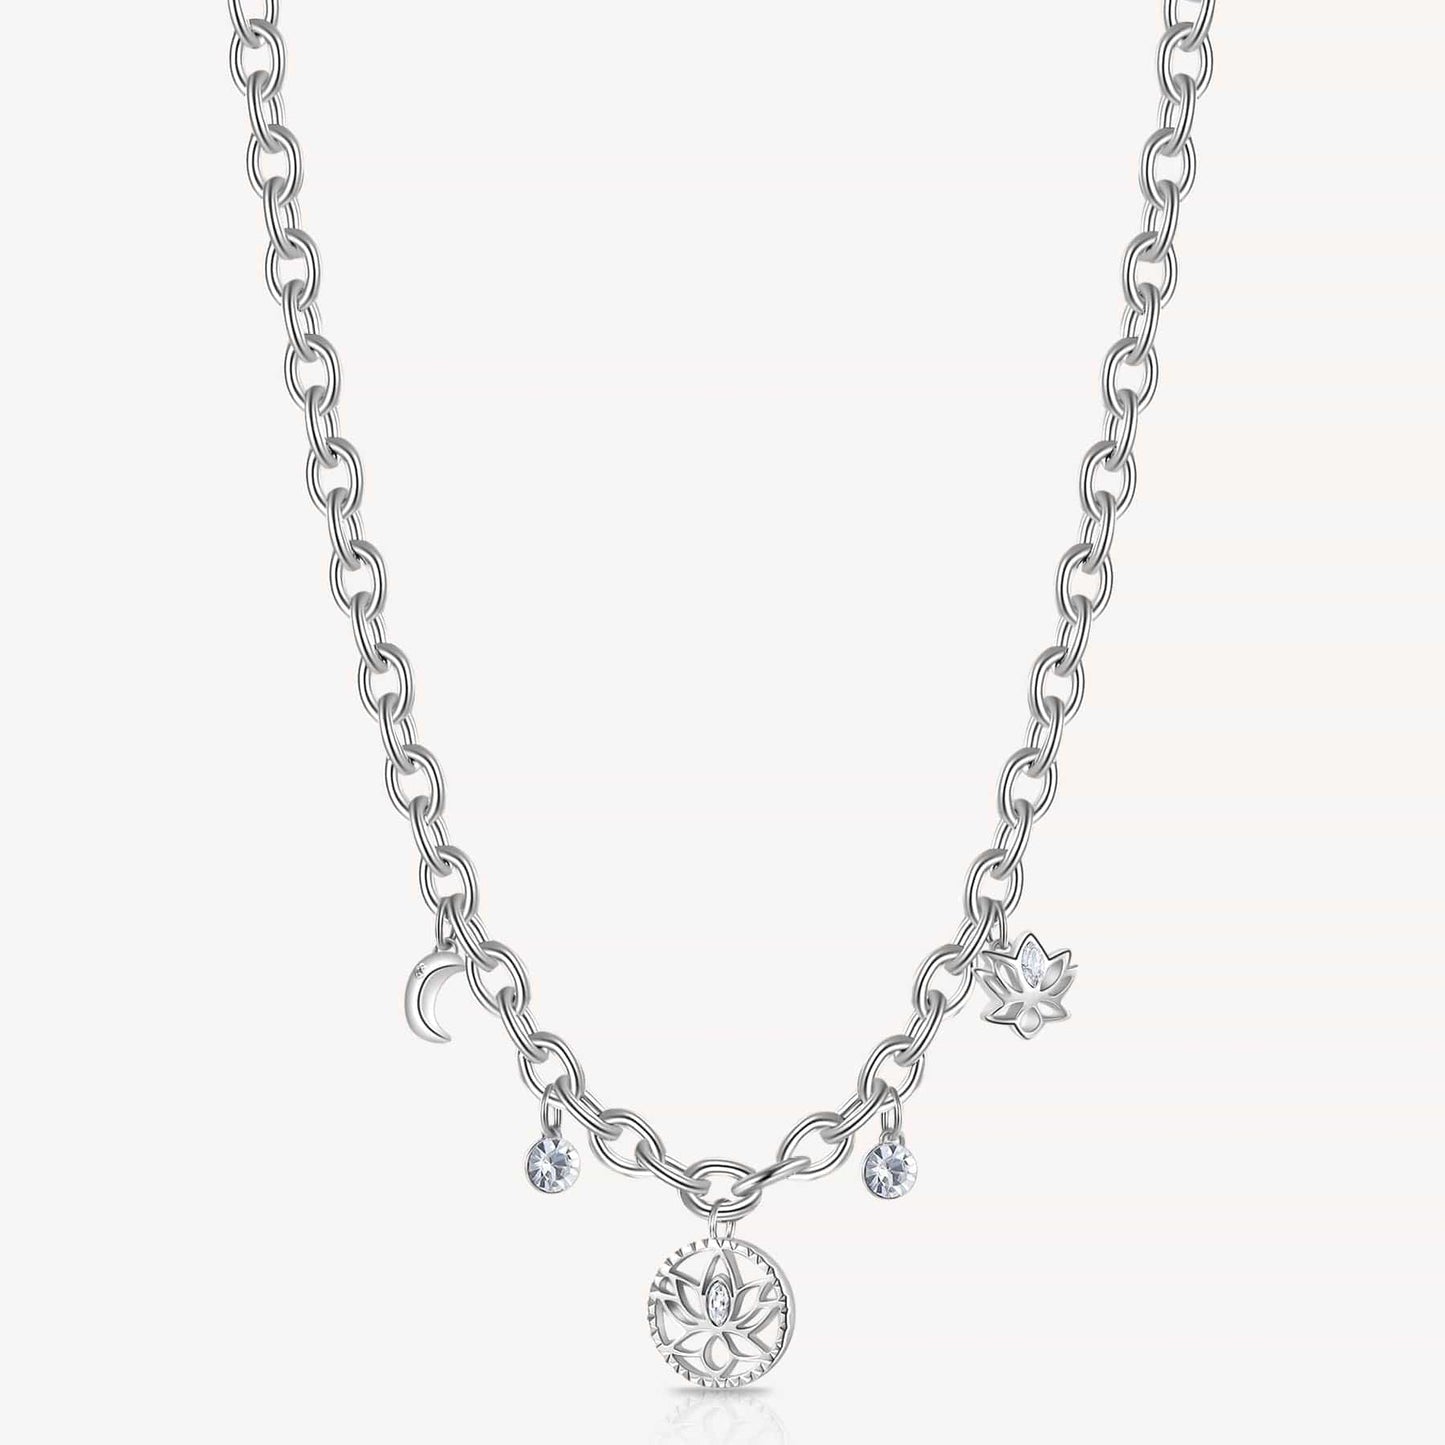 NKL-SS Stainless Steel Chakra Necklace - Lotus Flower Charms